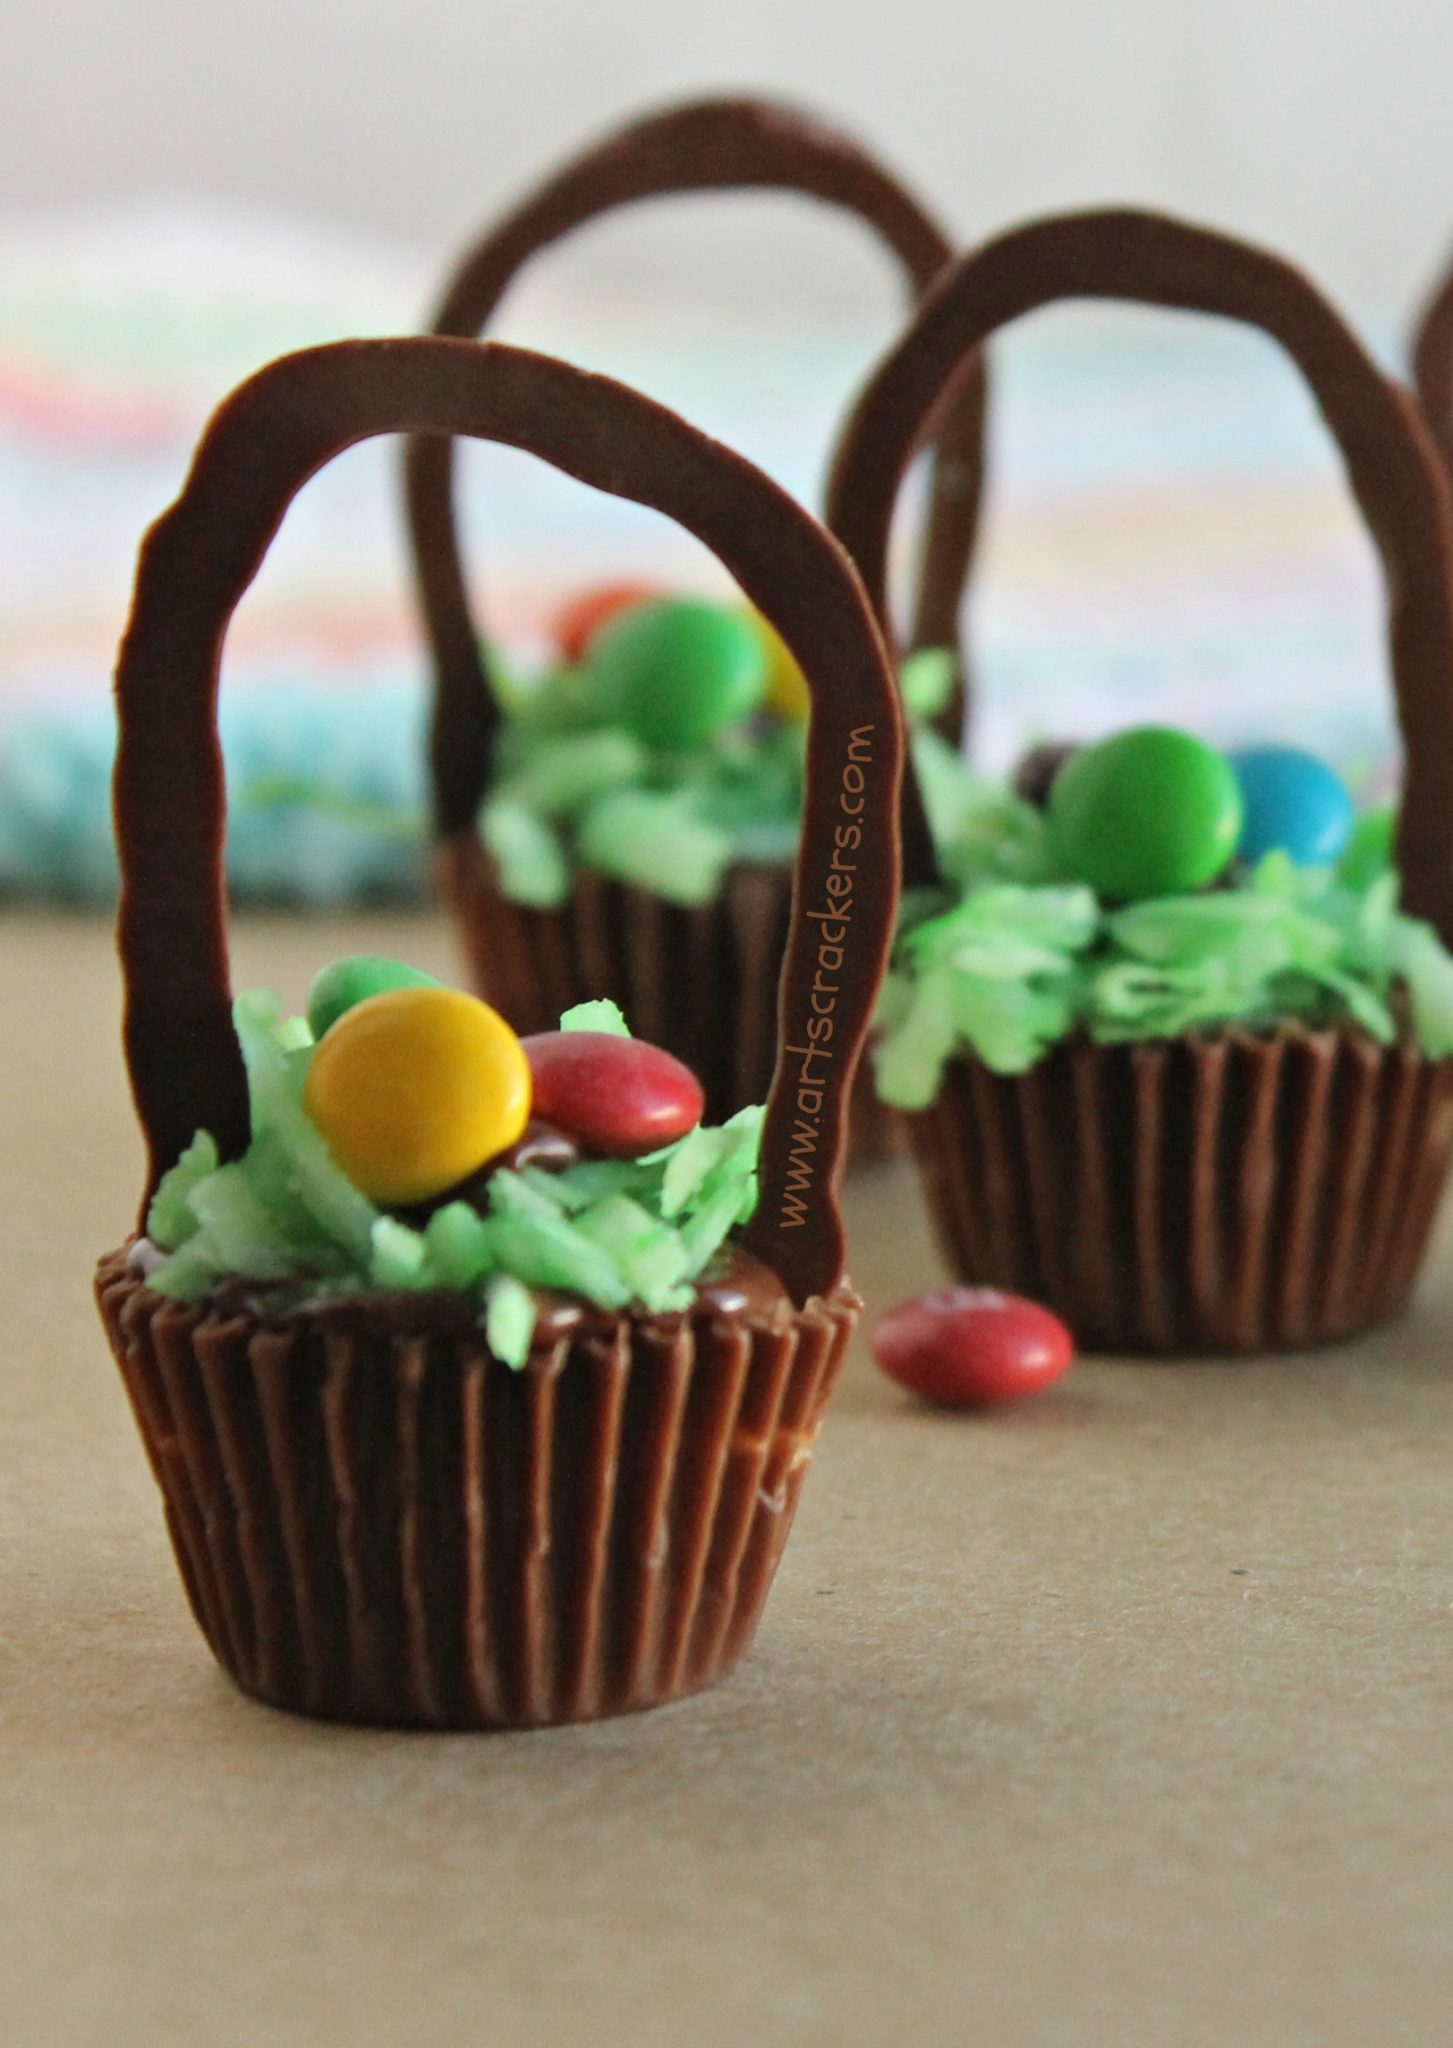 Chocolate nests made from Reese's 